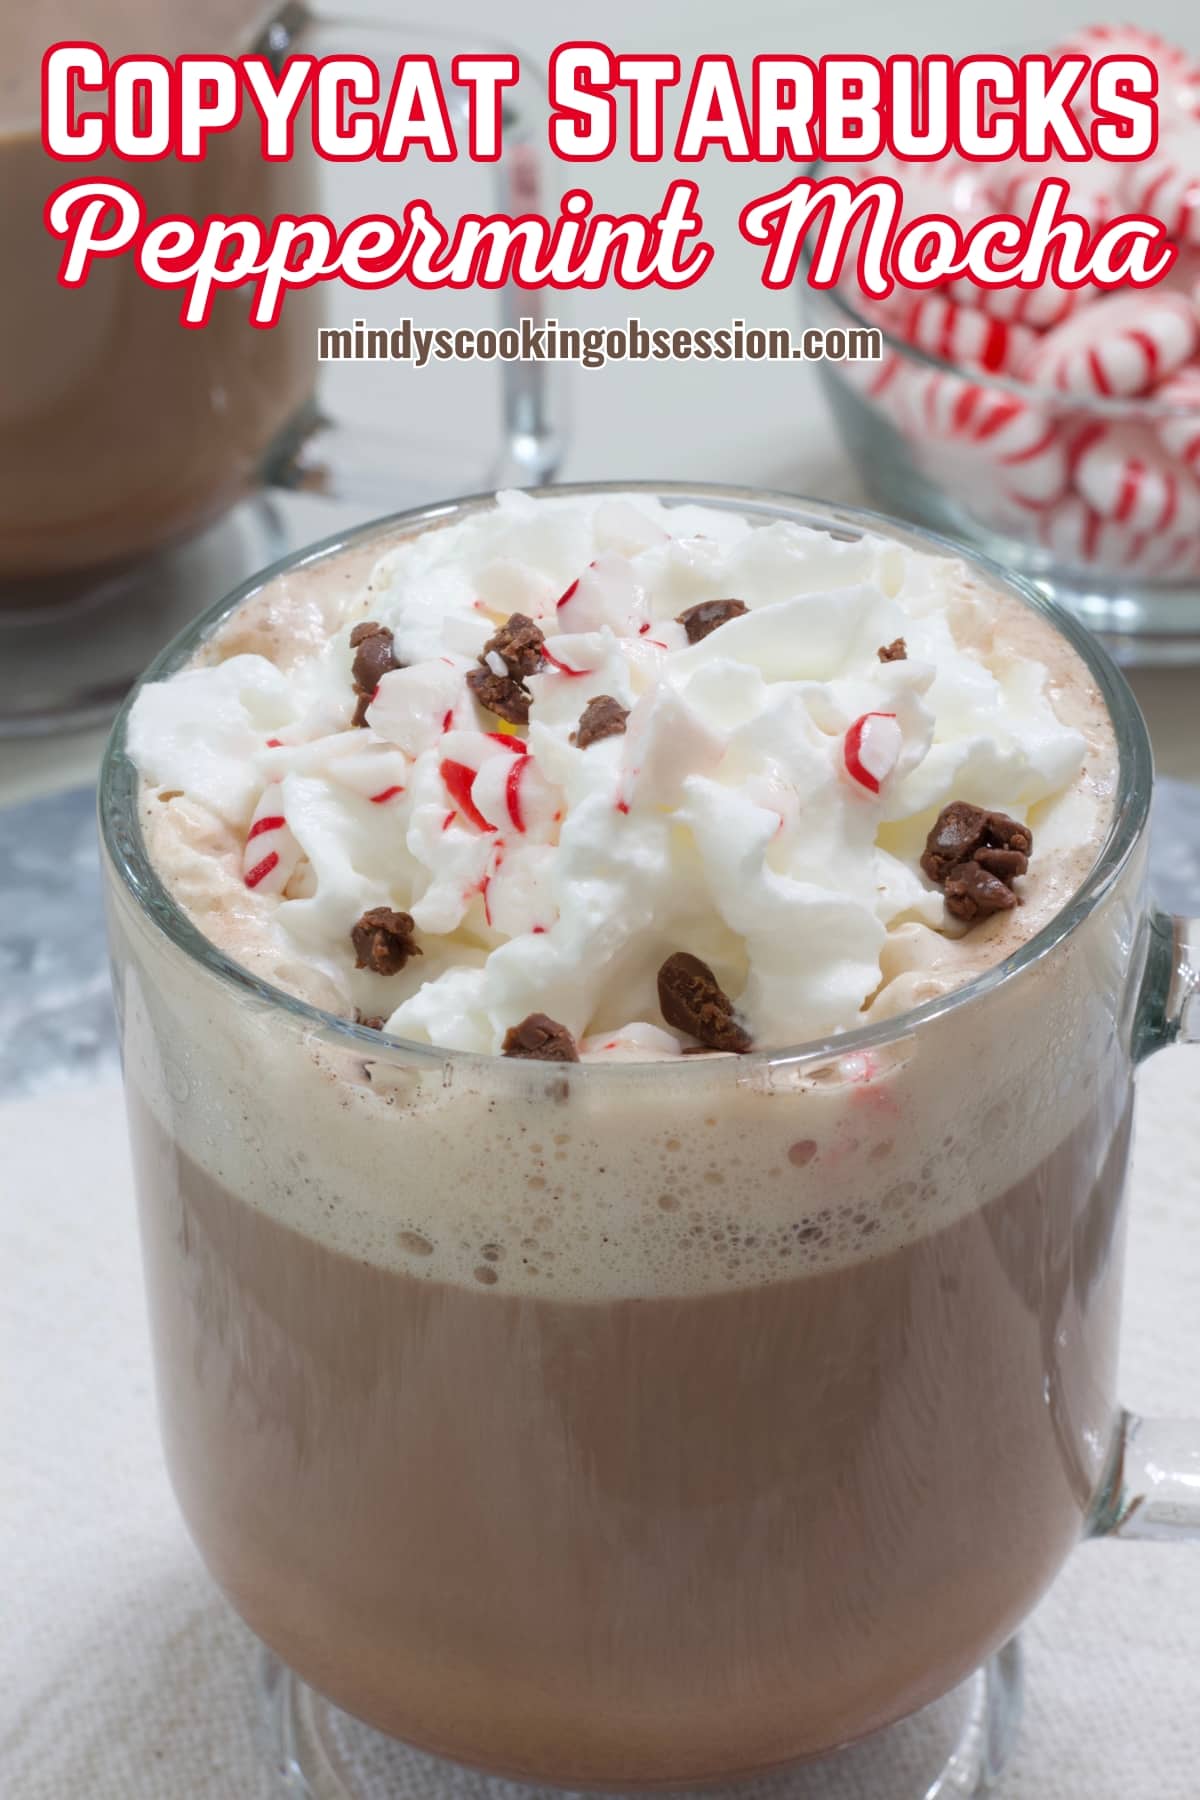 How to Make a Mocha Latte at Home (Recipe Included)